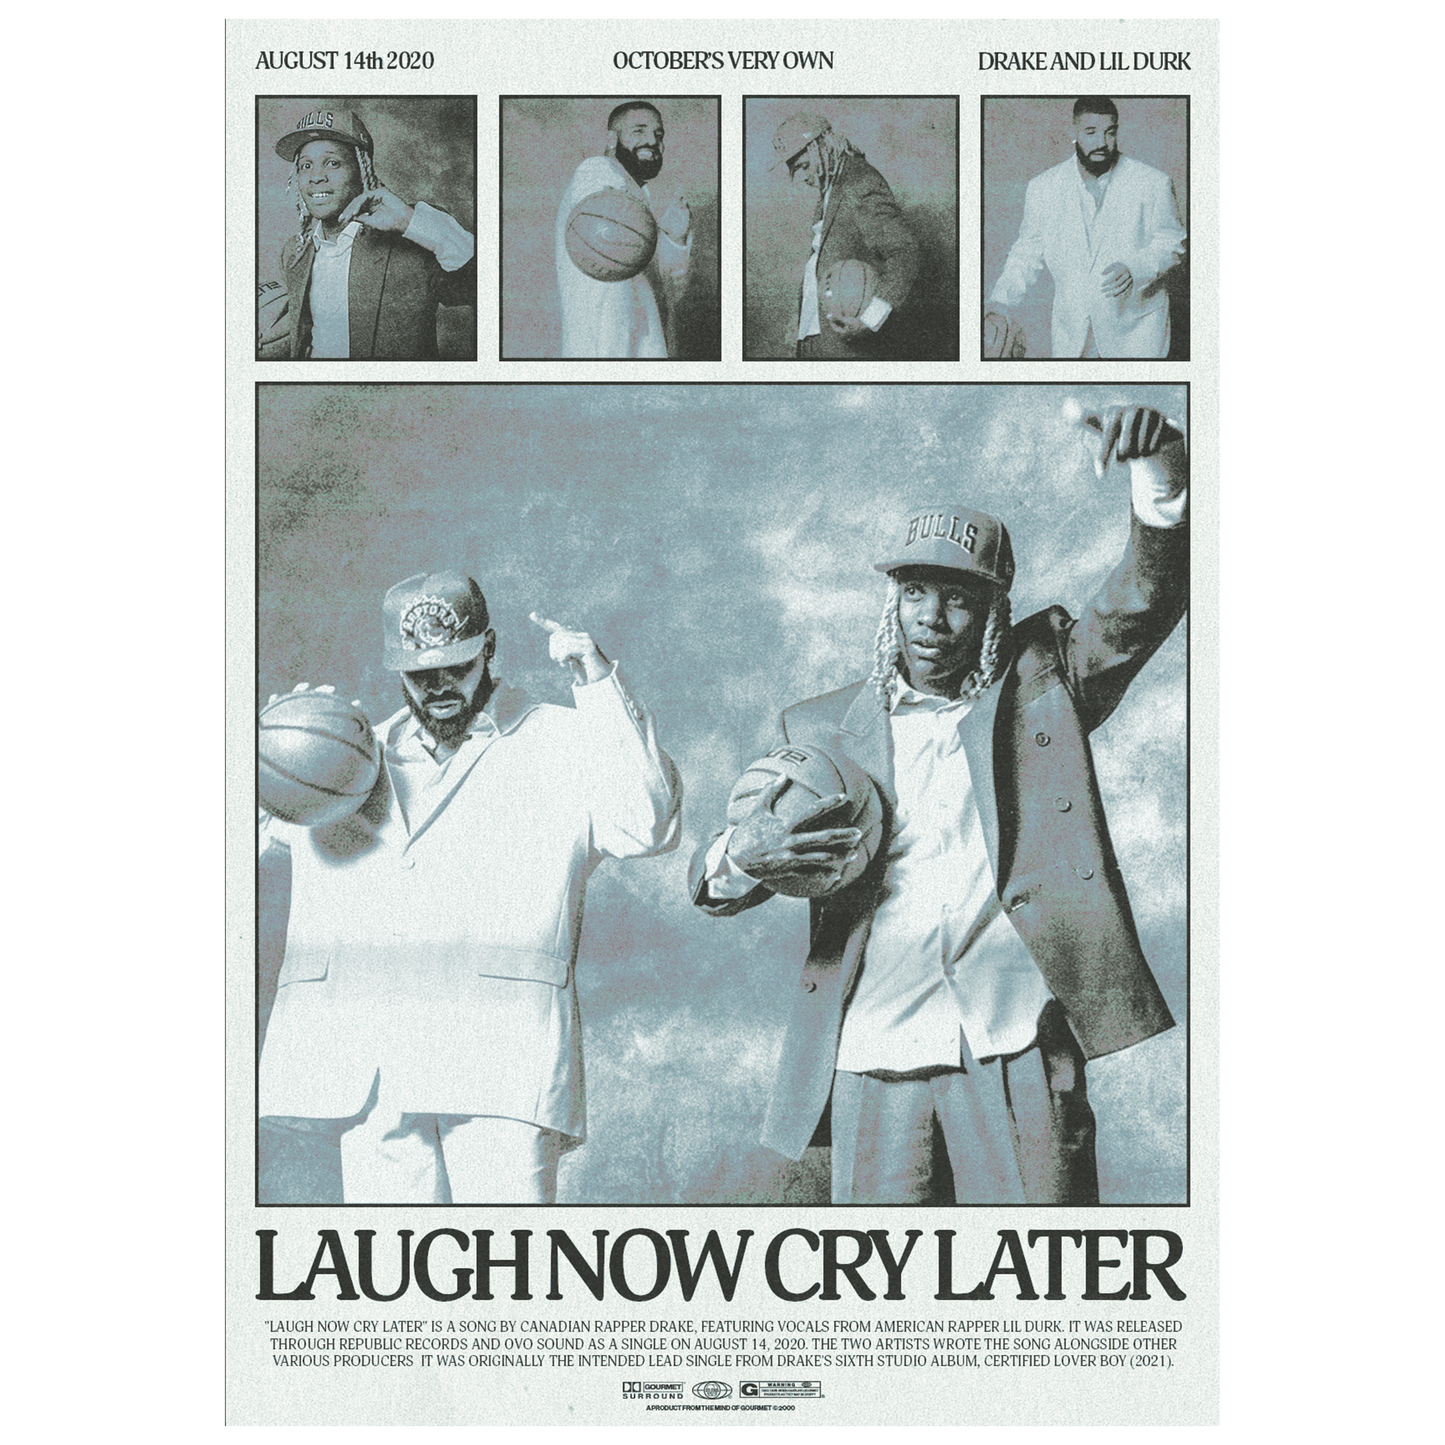 LAUGH NOW CRY LATER POSTER